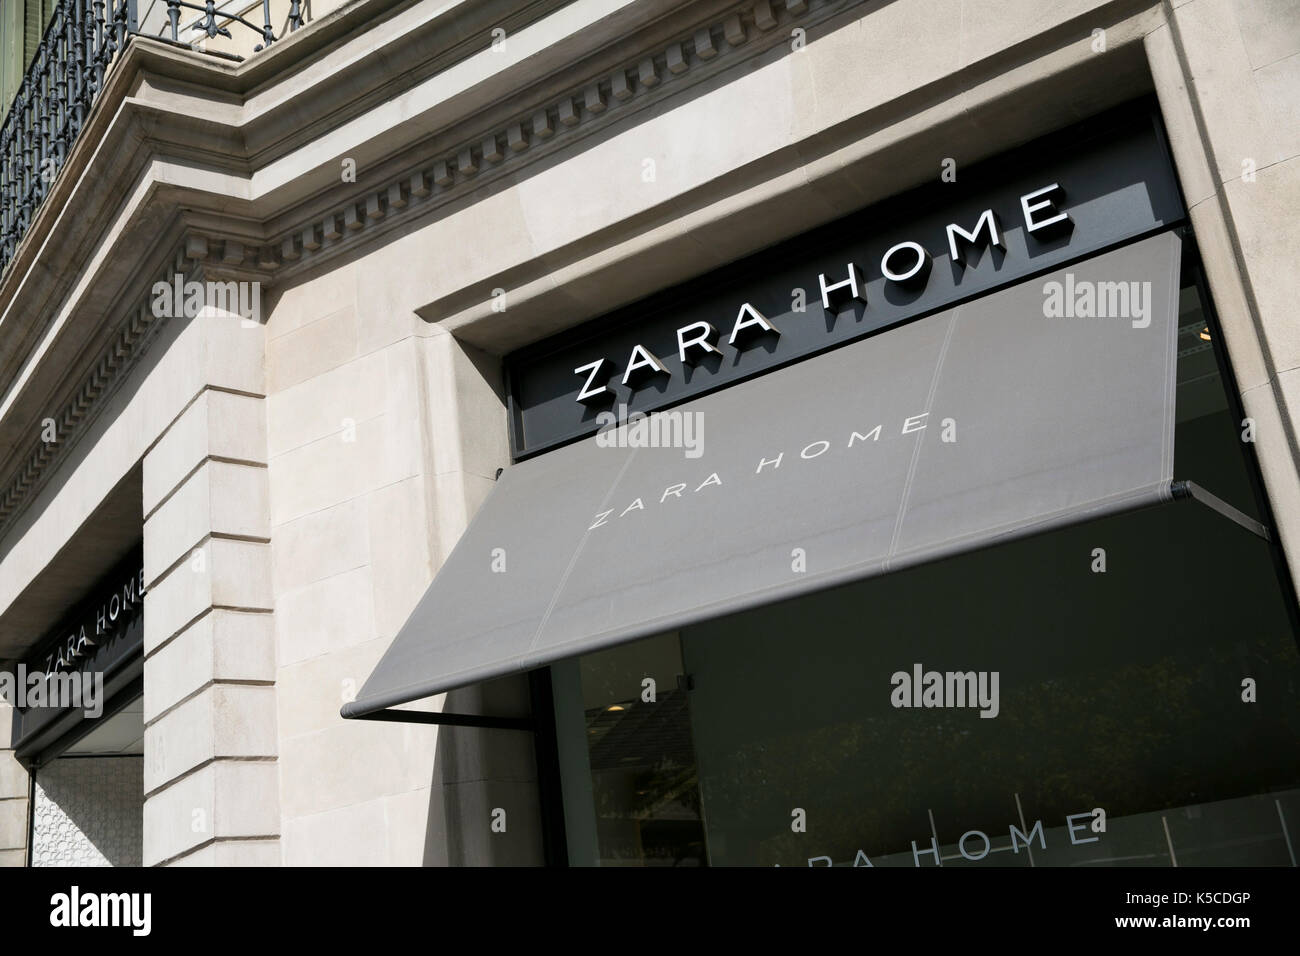 Zara Store Spain High Resolution Stock Photography and Images - Alamy